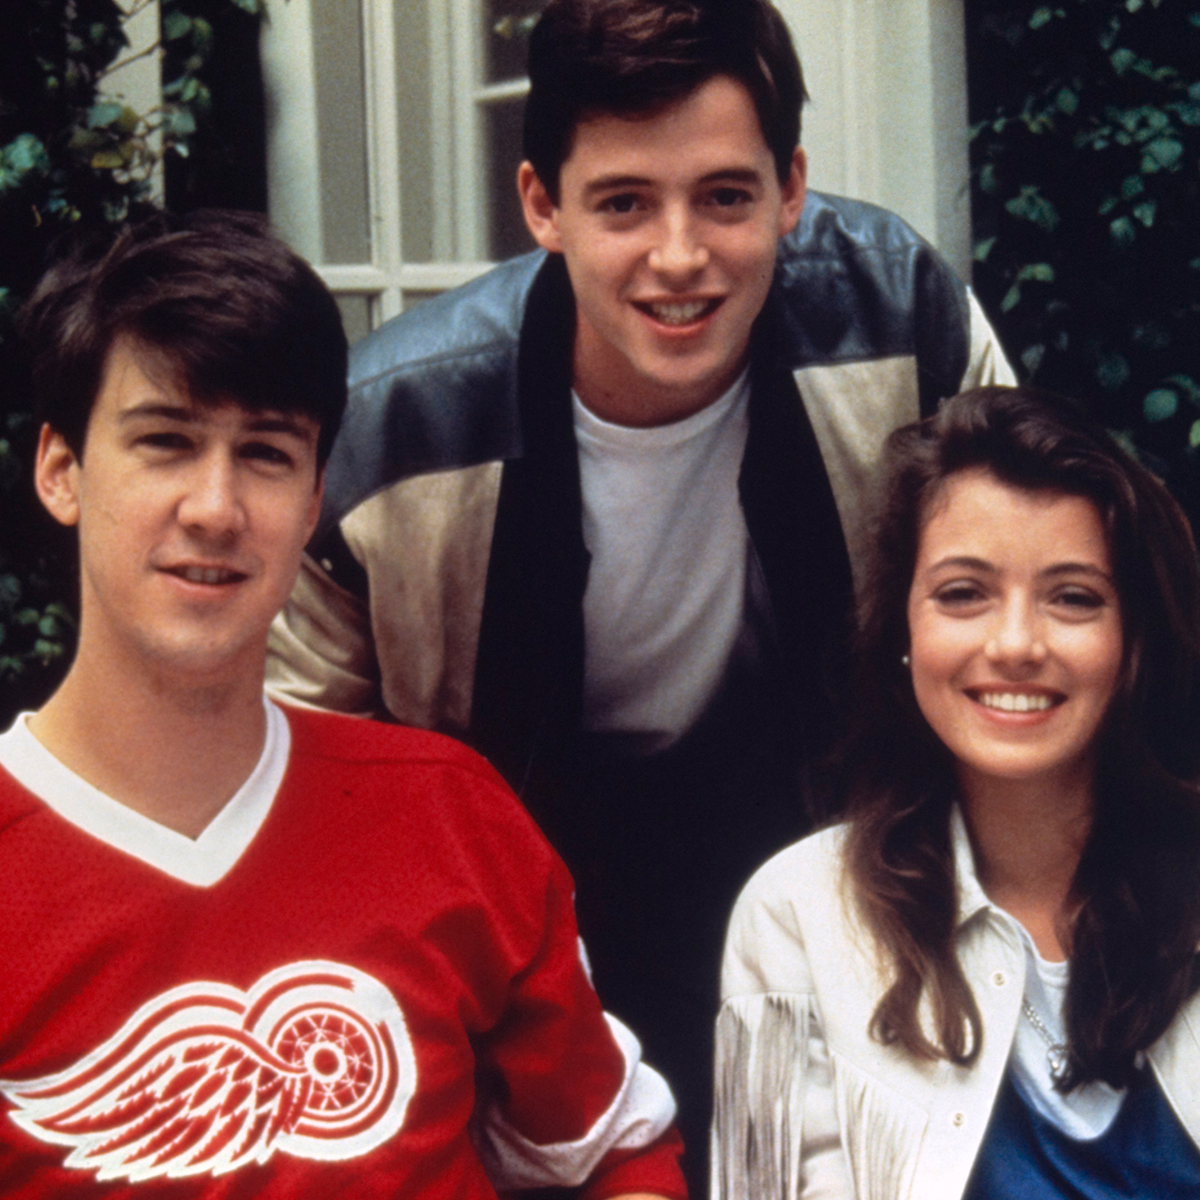 Fuck Ferris, Cameron Frye is the one we ought to watch.